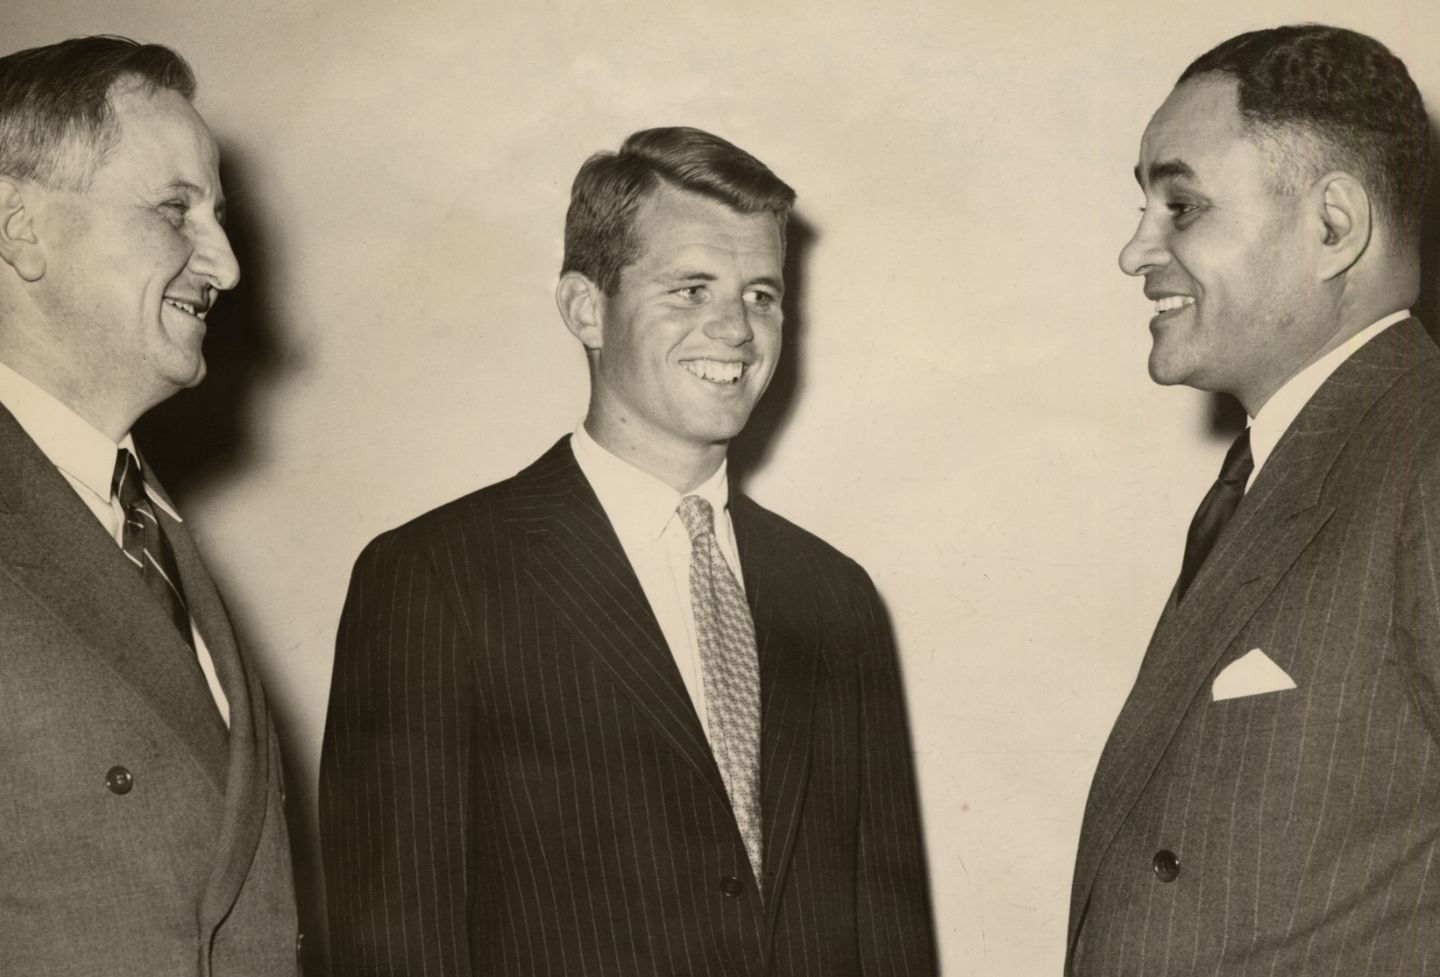 Nobel Prize winner Ralph Bunche, right, with Dean F.D.G. Ribble ’21 and Robert F. Kennedy ’51